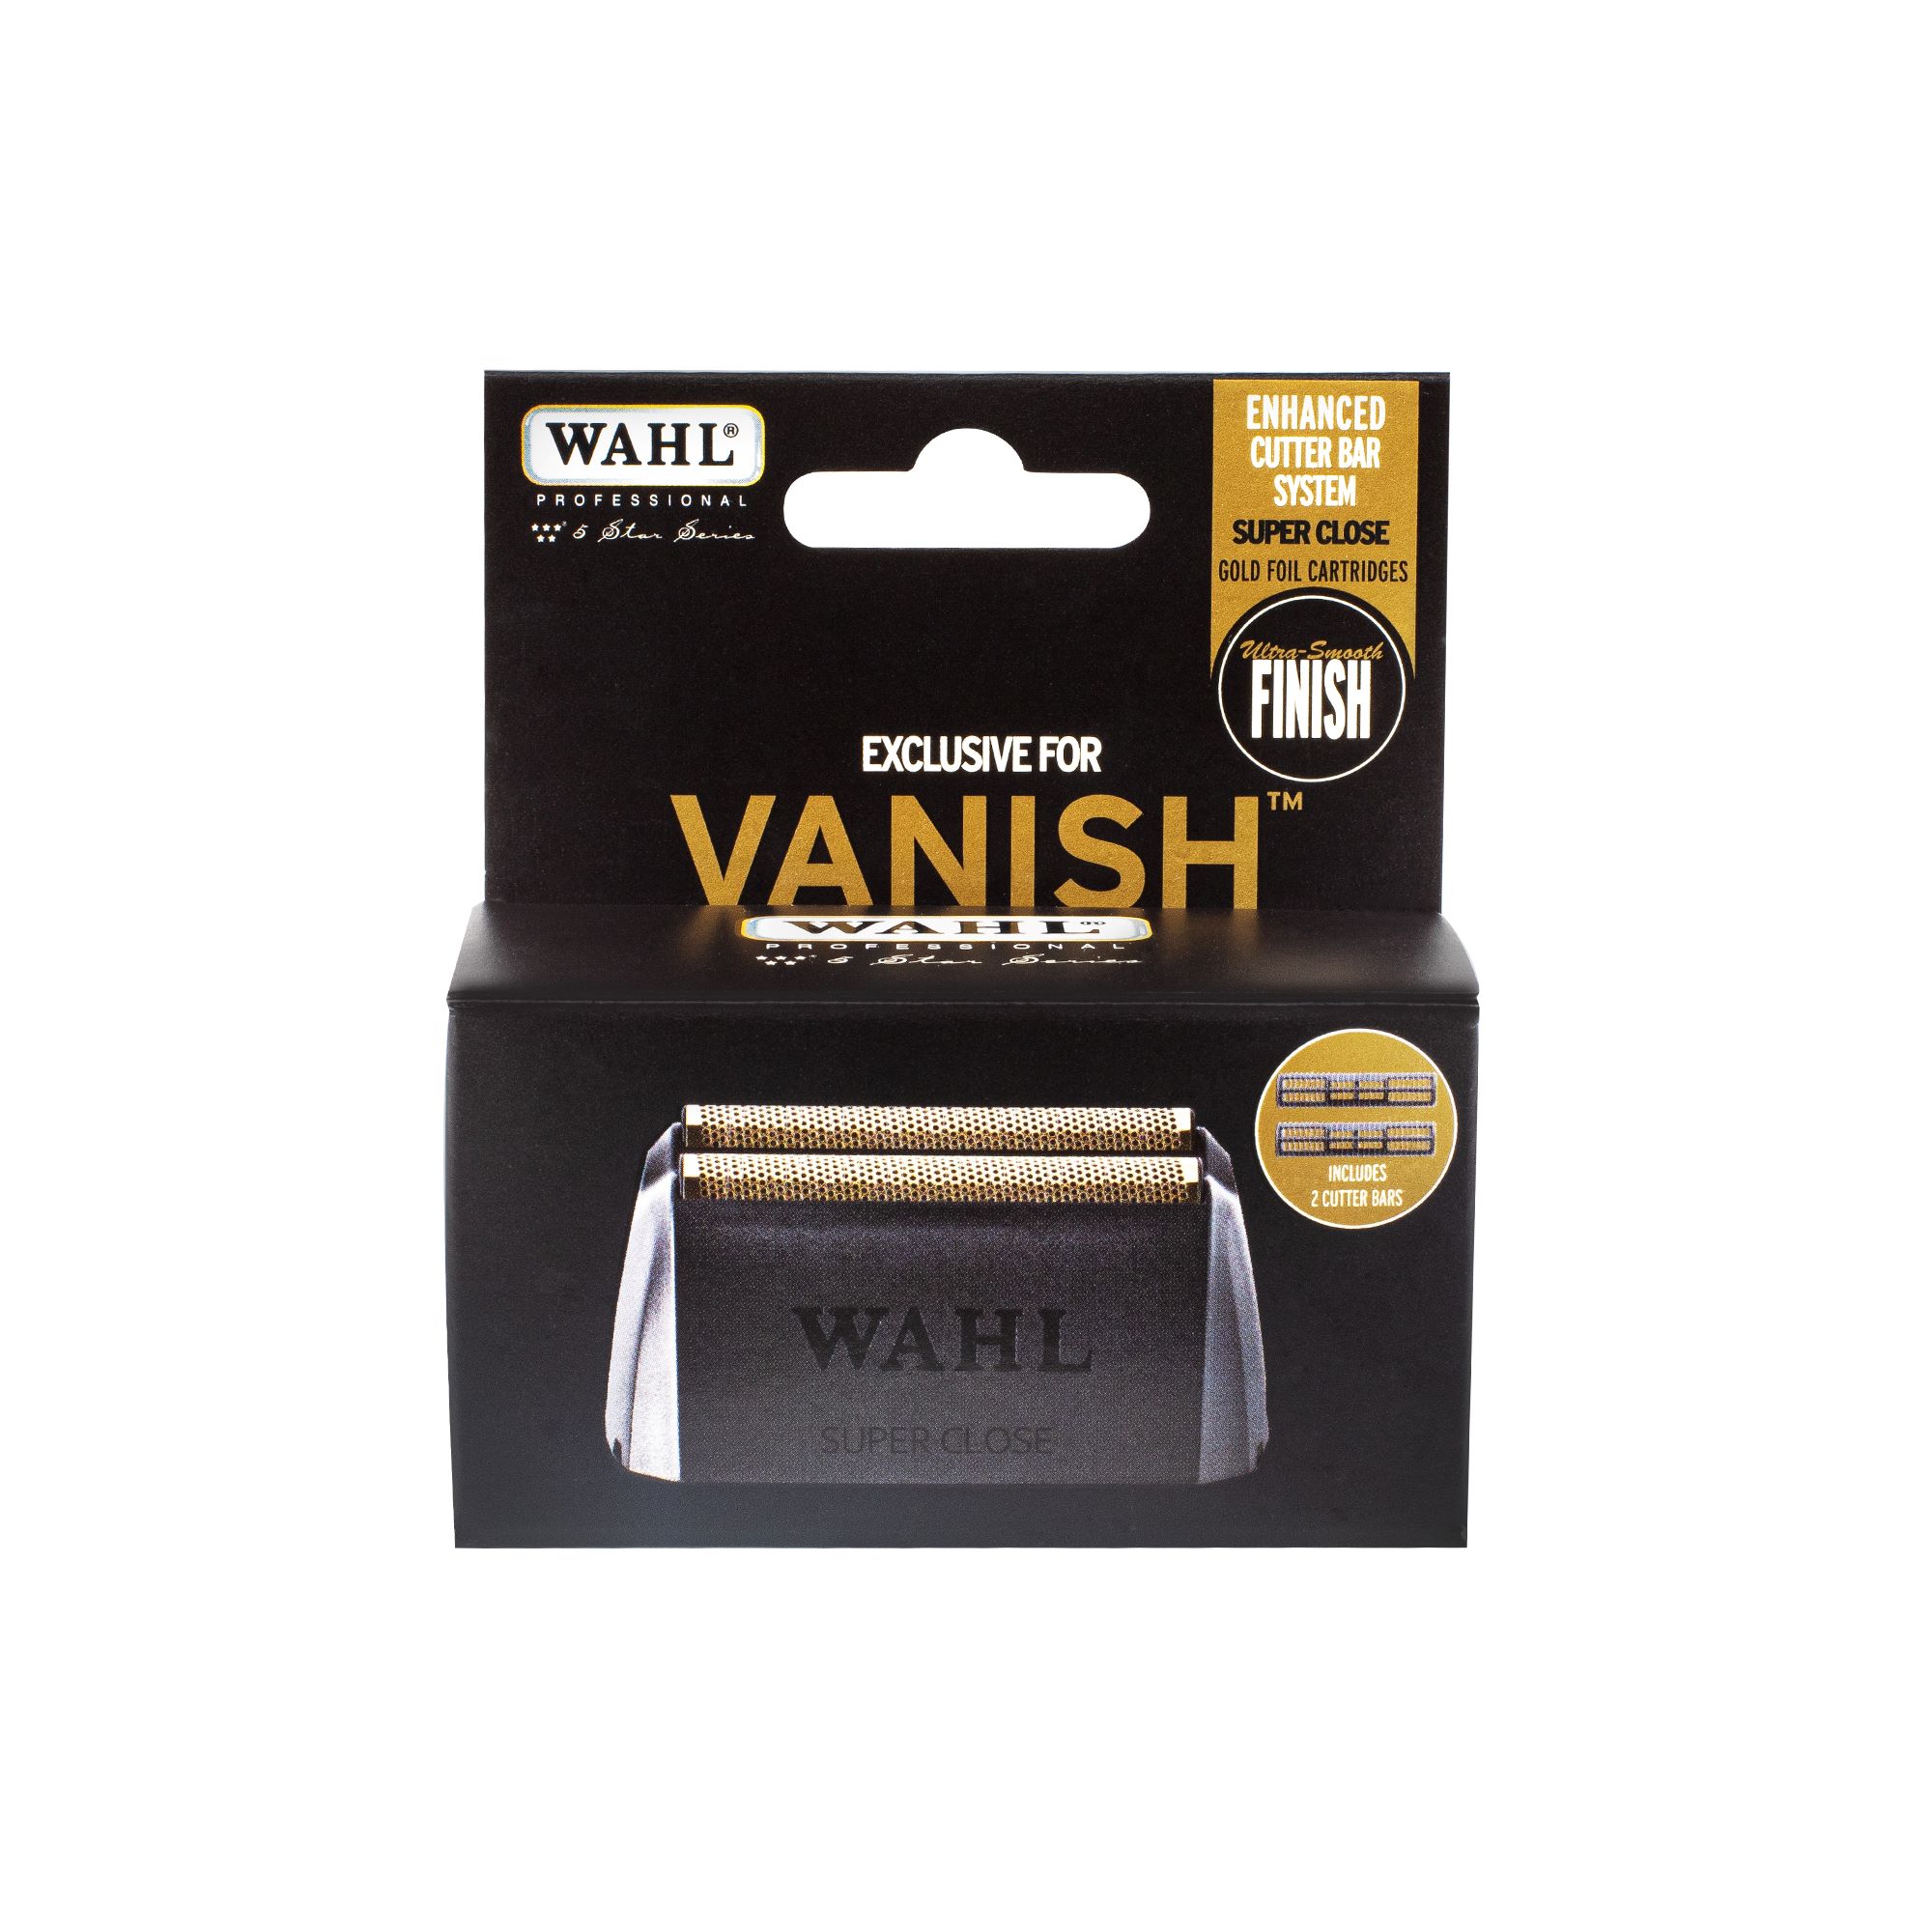 WAHL-SPARE-SHAVER-FOIL-AND-CUTTER-VANISH.